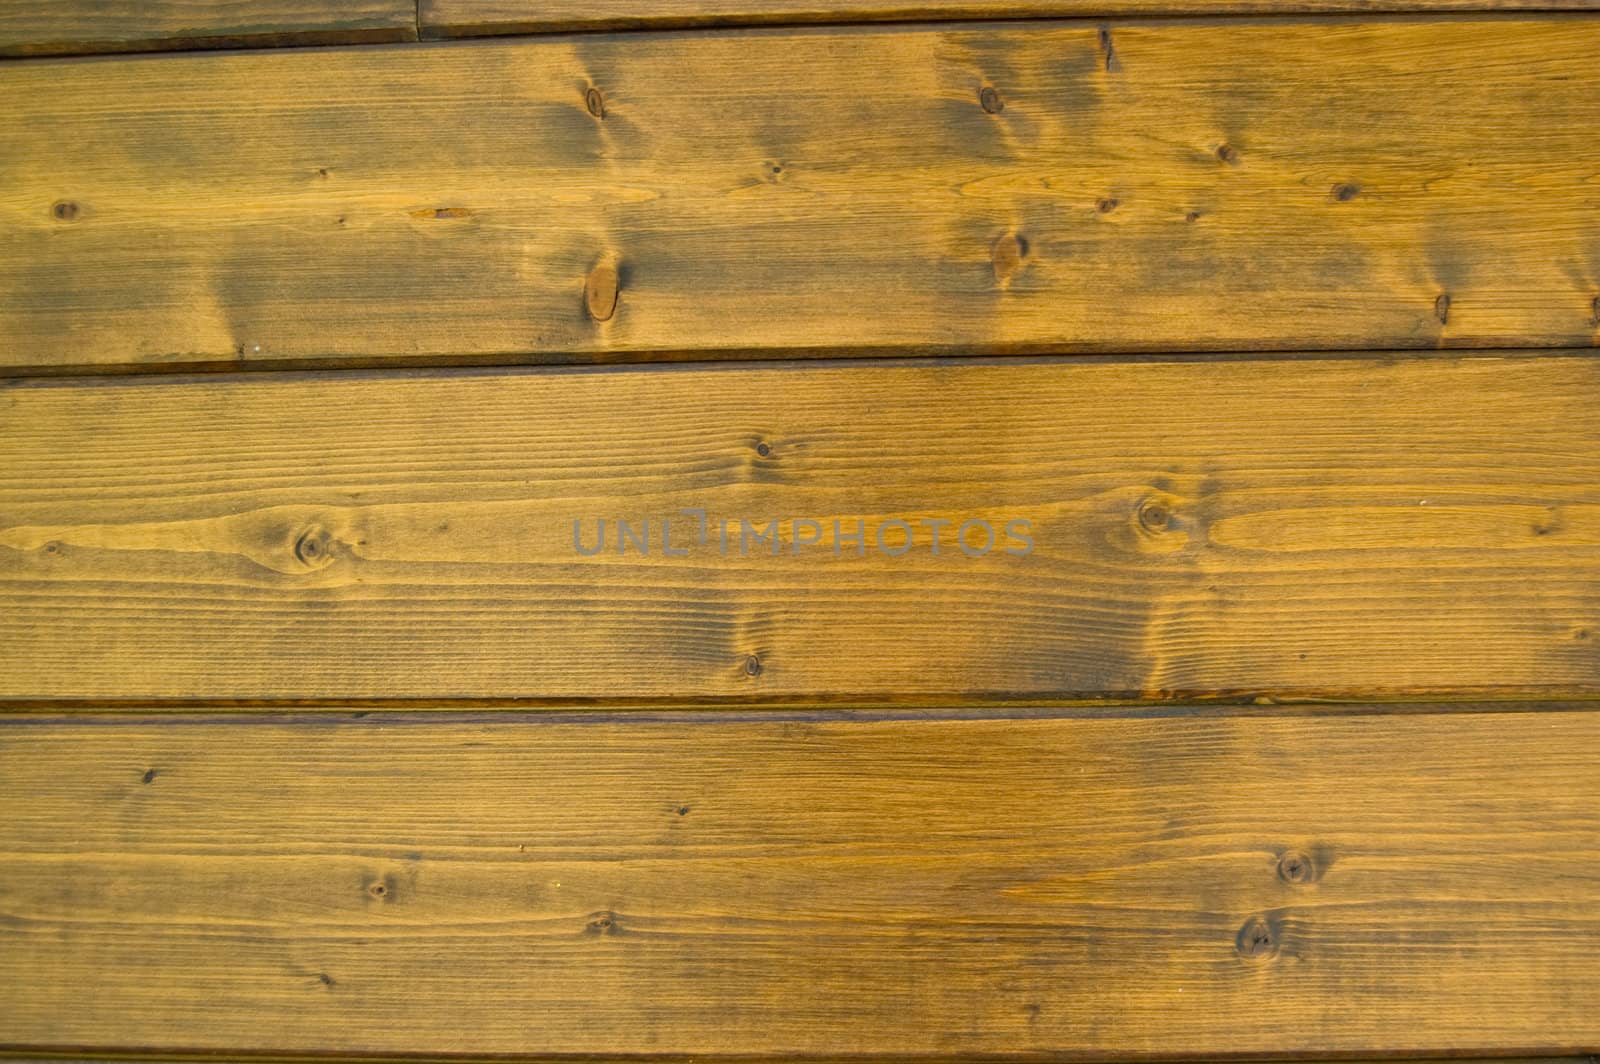 Facing of wooden boards of a wall. Detail of an alpine refuge side